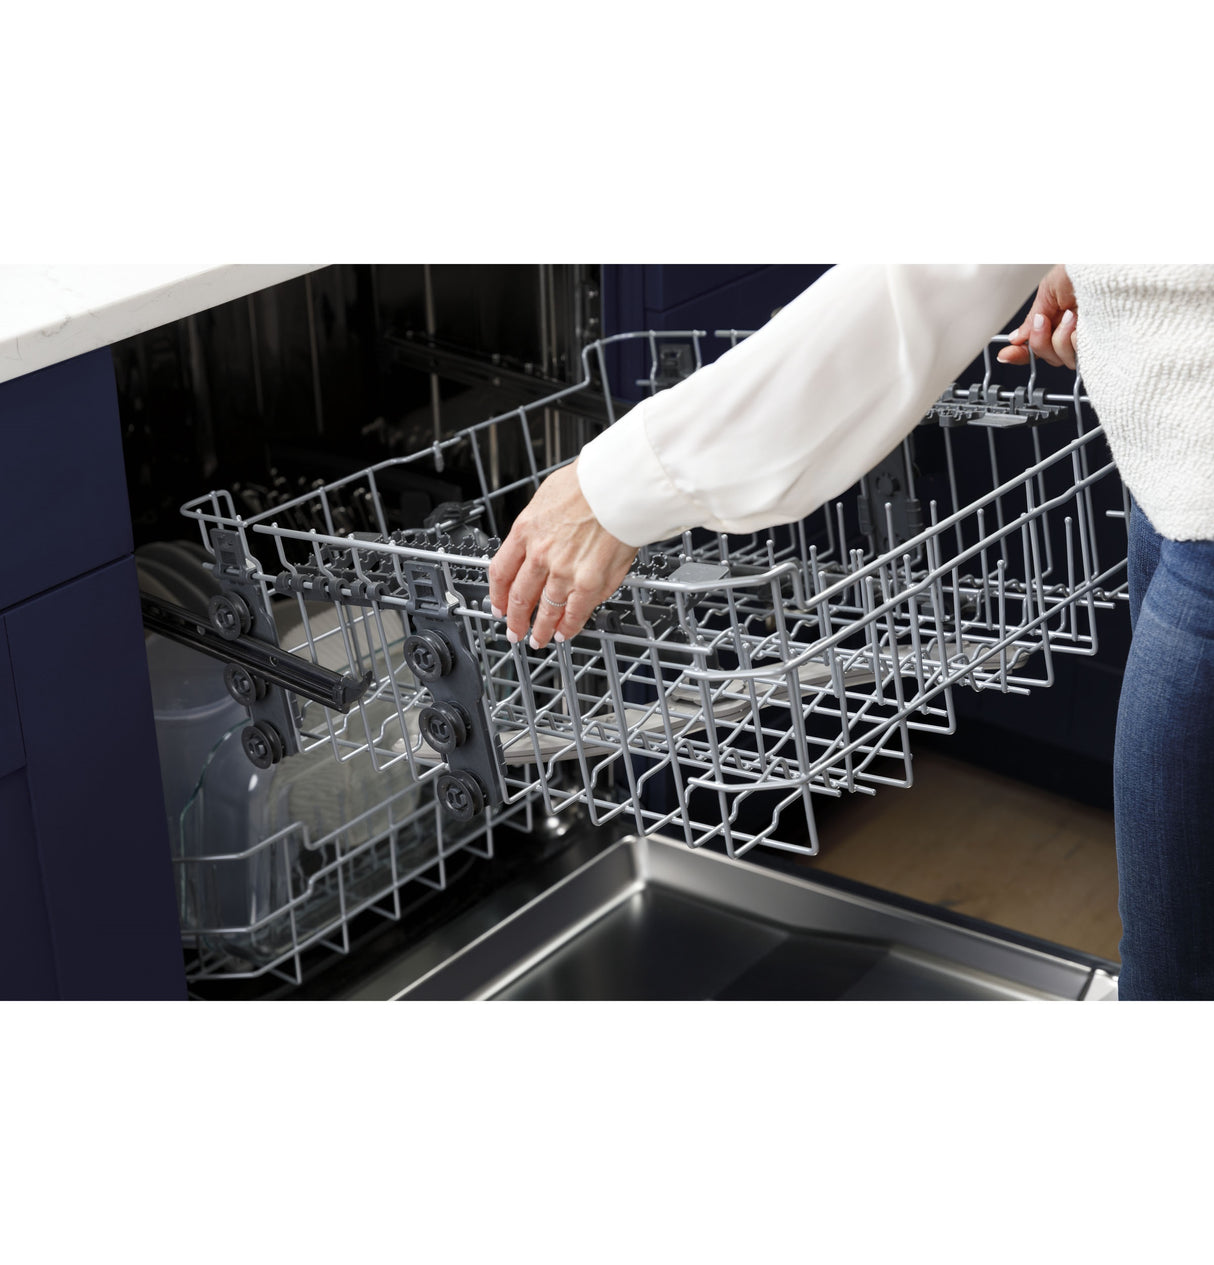 GE(R) ENERGY STAR(R) Top Control with Stainless Steel Interior Dishwasher with Sanitize Cycle & Dry Boost with Fan Assist - (GDT645SGNWW)